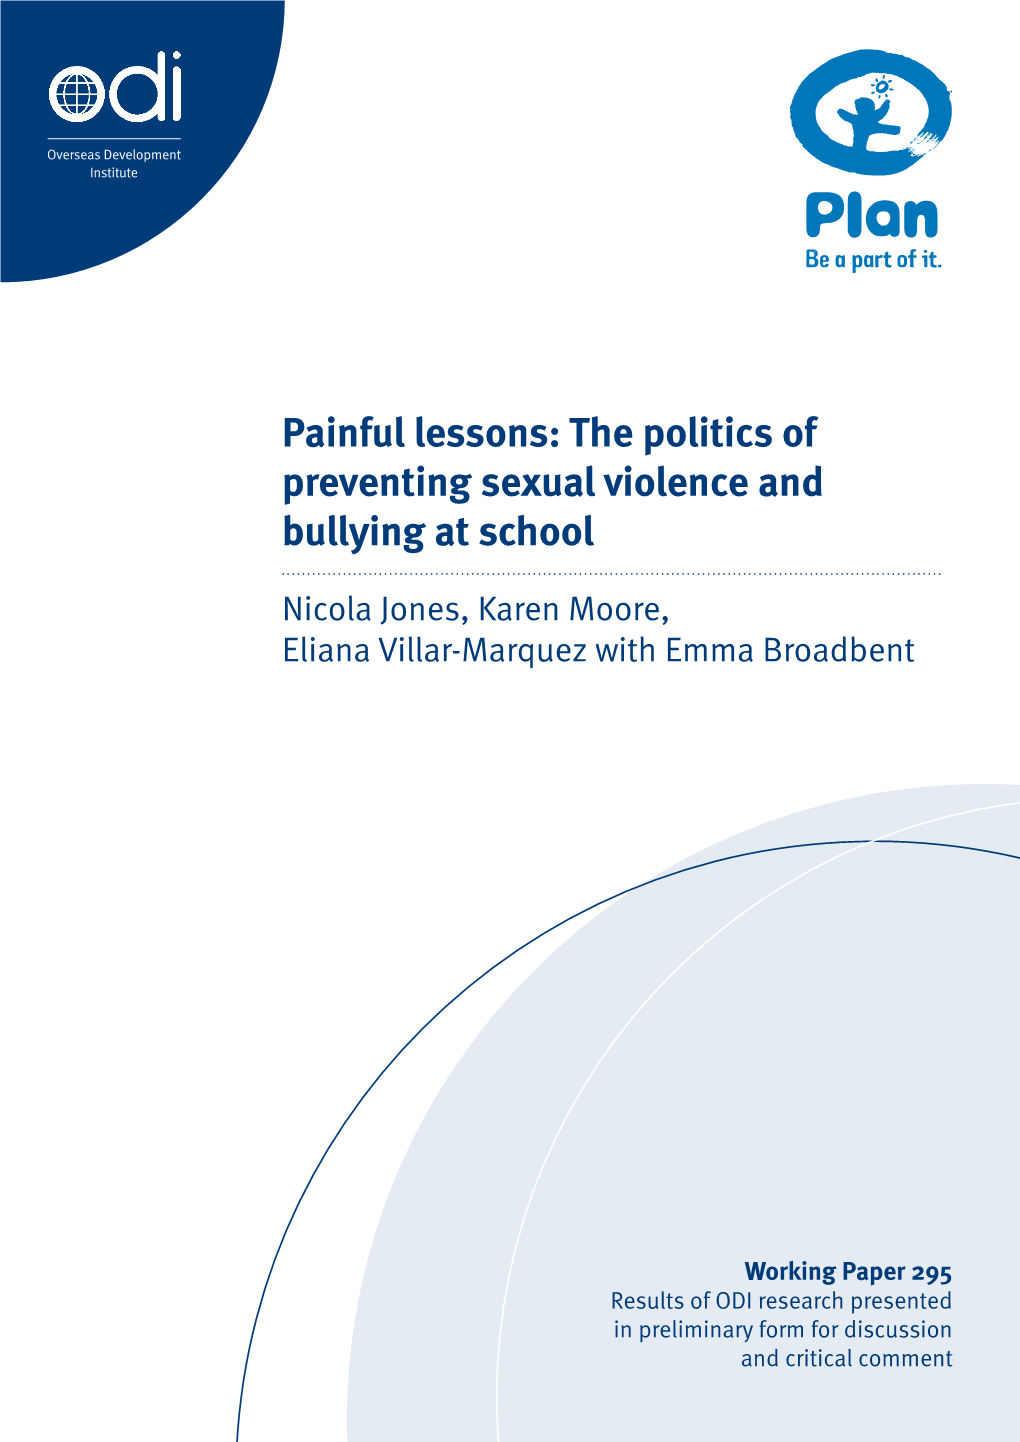 The Politics of Preventing Sexual Violence and Bullying at School